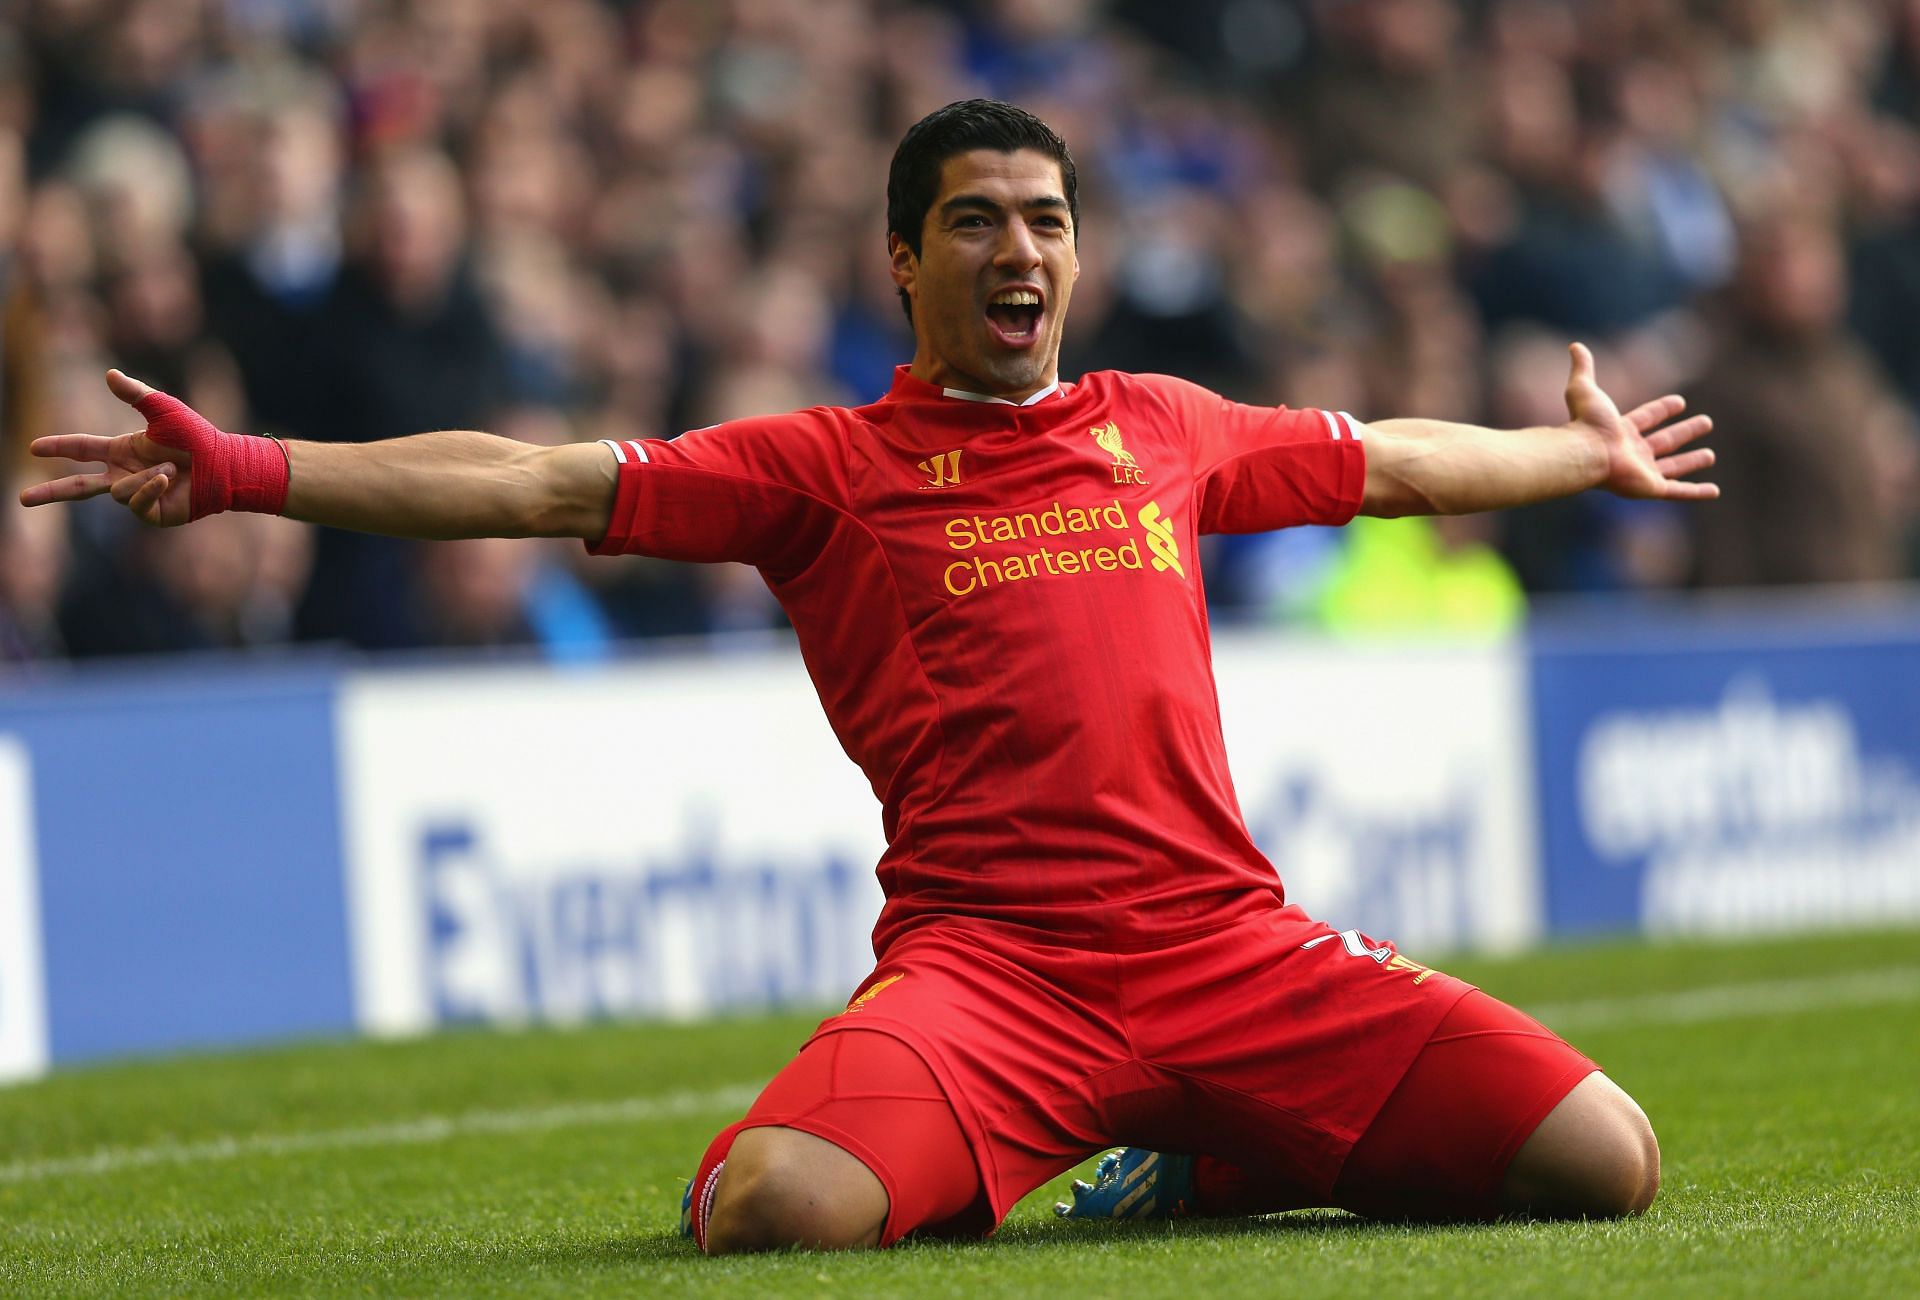 Luis Suarez created havoc in Premier League and LaLiga with his goalscoring prowess